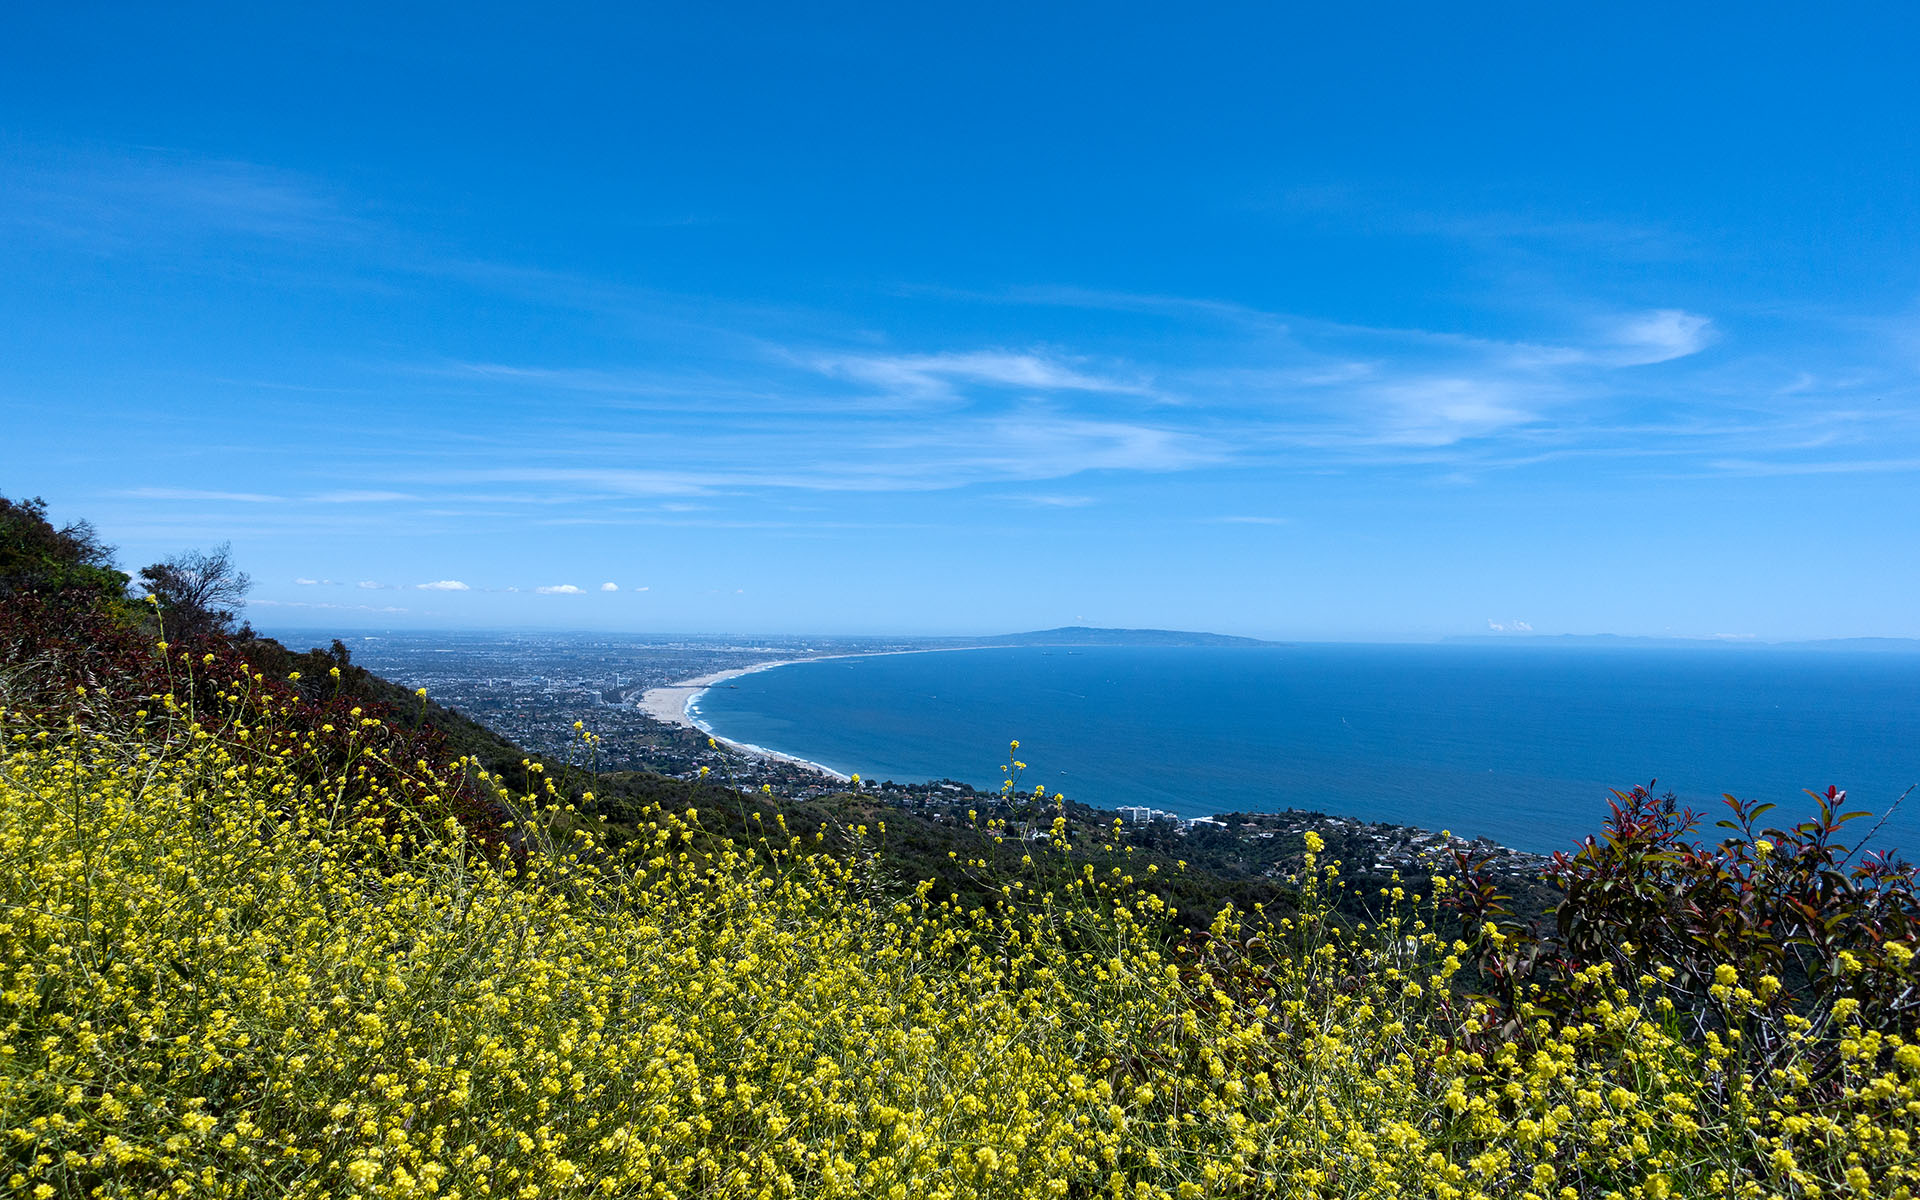 Wildflowers and Santa Monica Bay from Topanga State Park in the Santa Monica Mountains